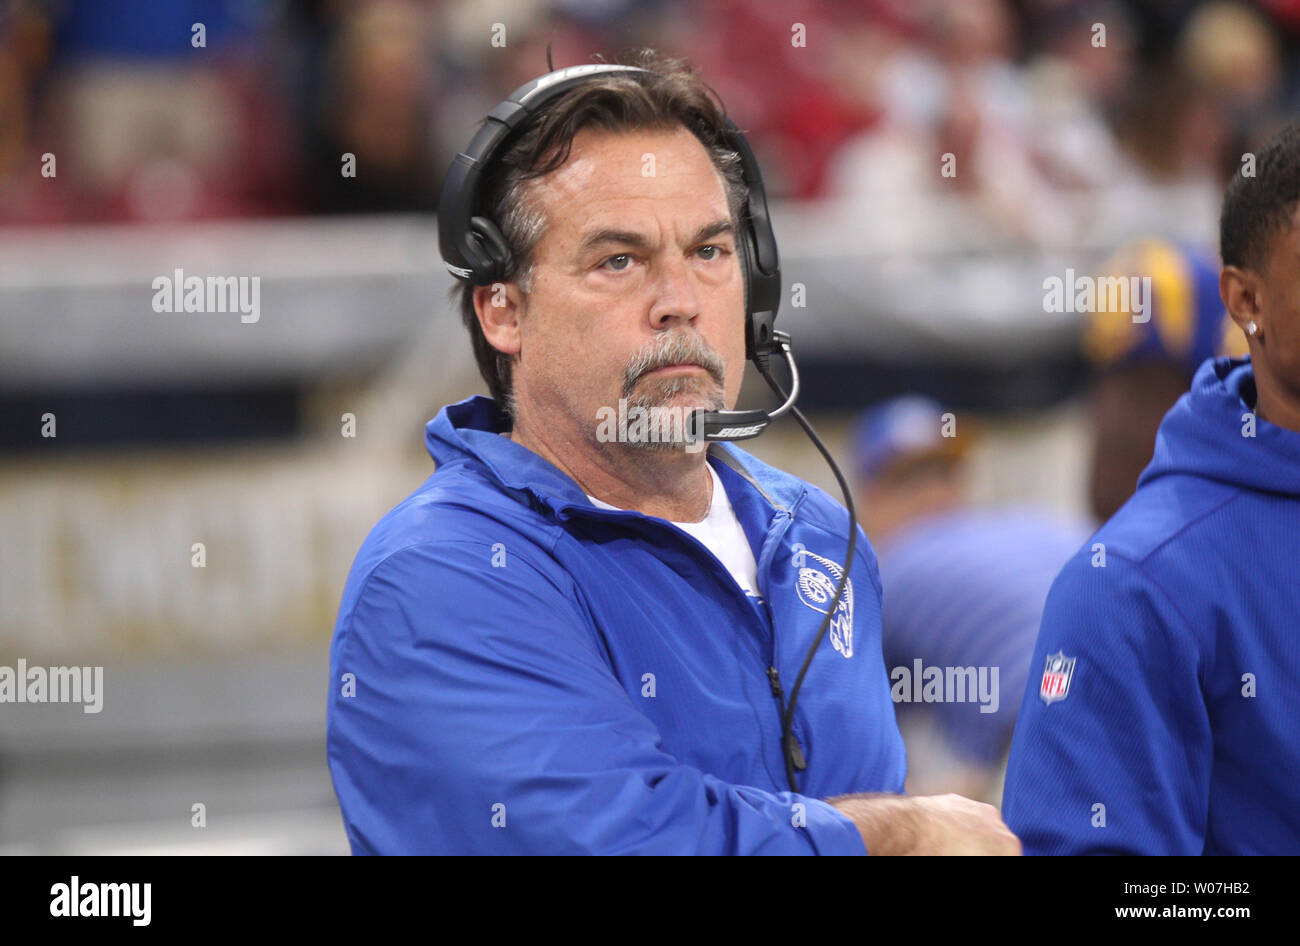 St. Louis Rams head football coach Jeff Fisher watches as his team takes to the field for a game against the New York Giants at the Edward Jones Dome in St. Louis on December 21, 2014.  UPI/Bill Greenblatt Stock Photo